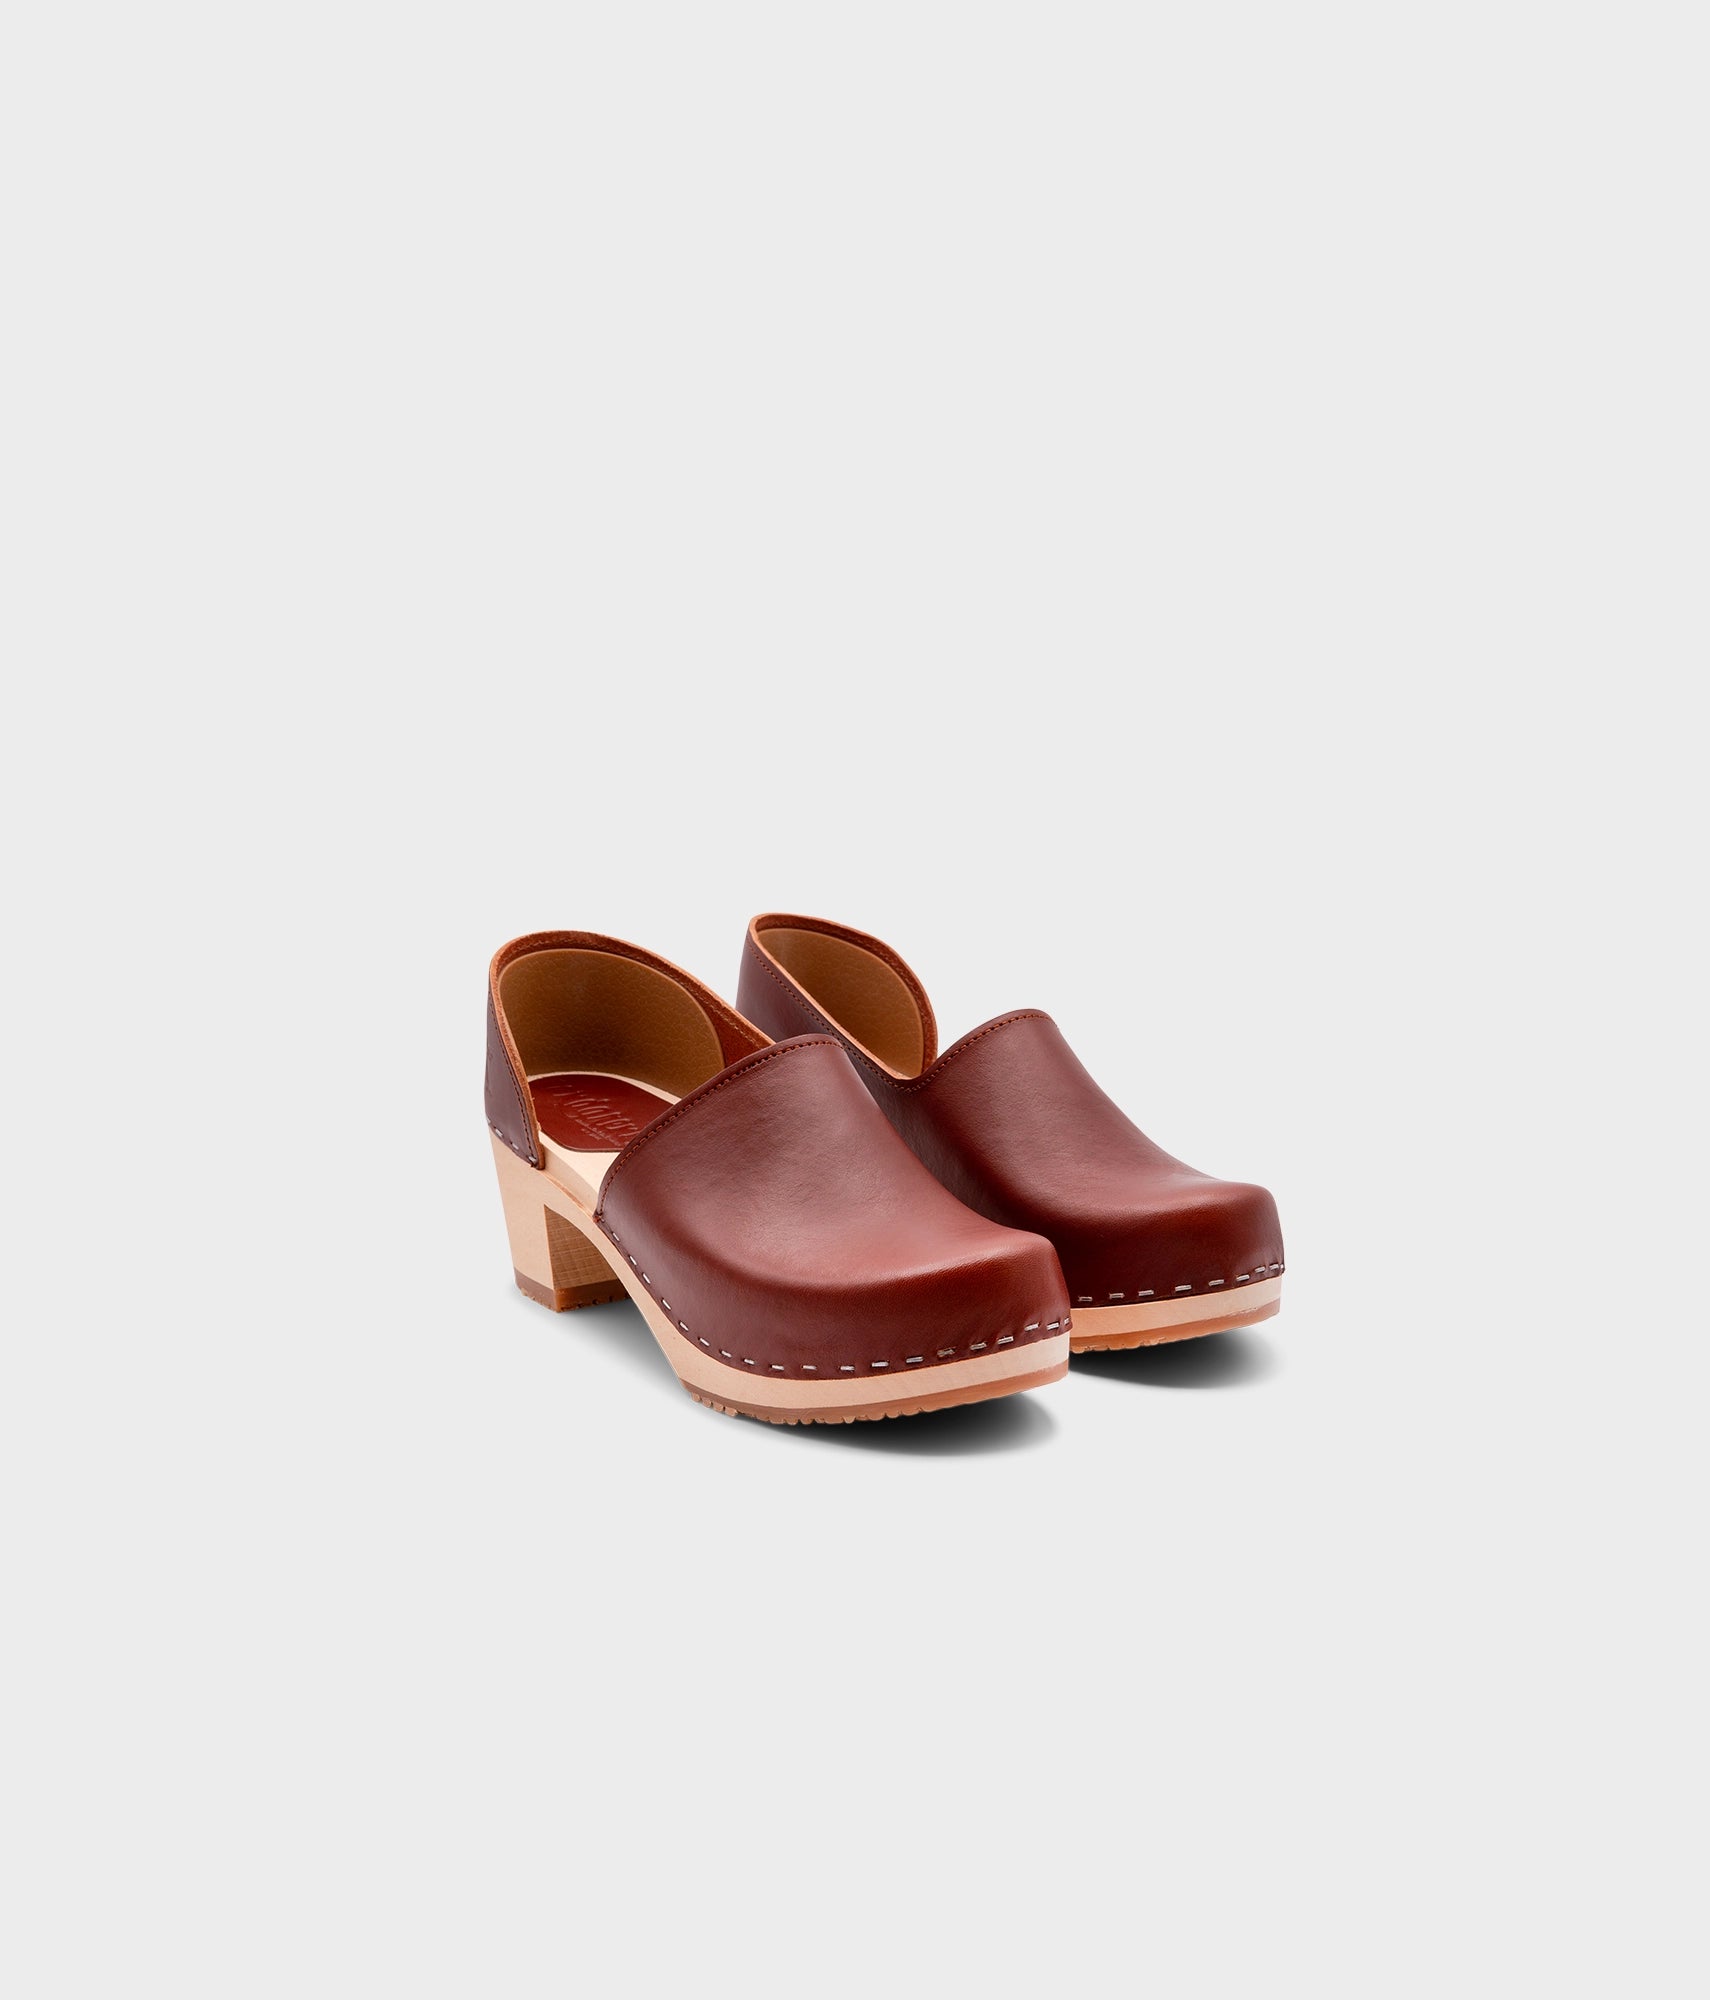 high heeled closed-back clogs in red cognac vegetable tanned leather stapled on a light wooden base